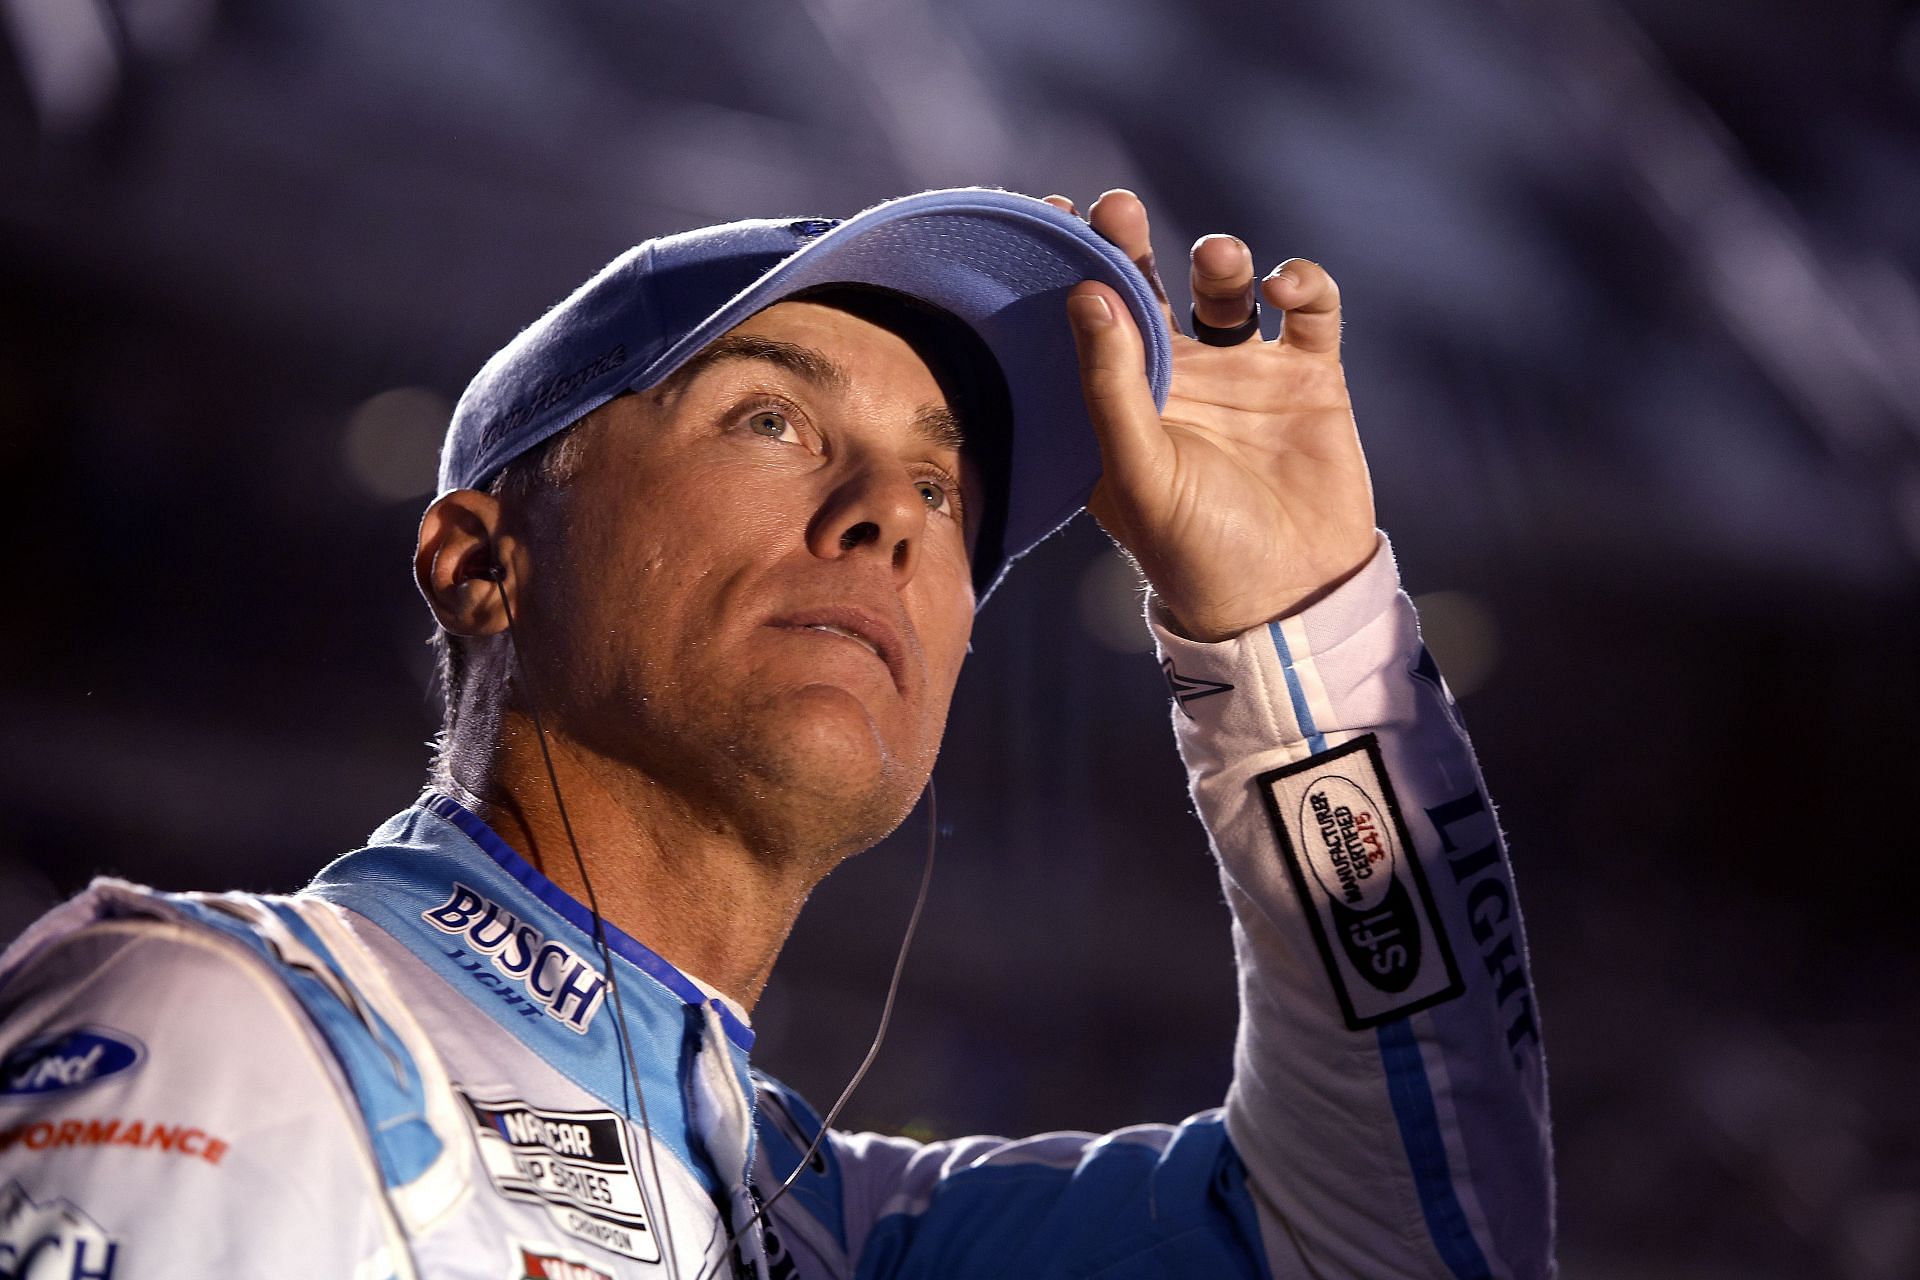 Kevin Harvick during qualifying for the NASCAR Cup Series 64th Annual Daytona 500 (Photo by Sean Gardner/Getty Images)